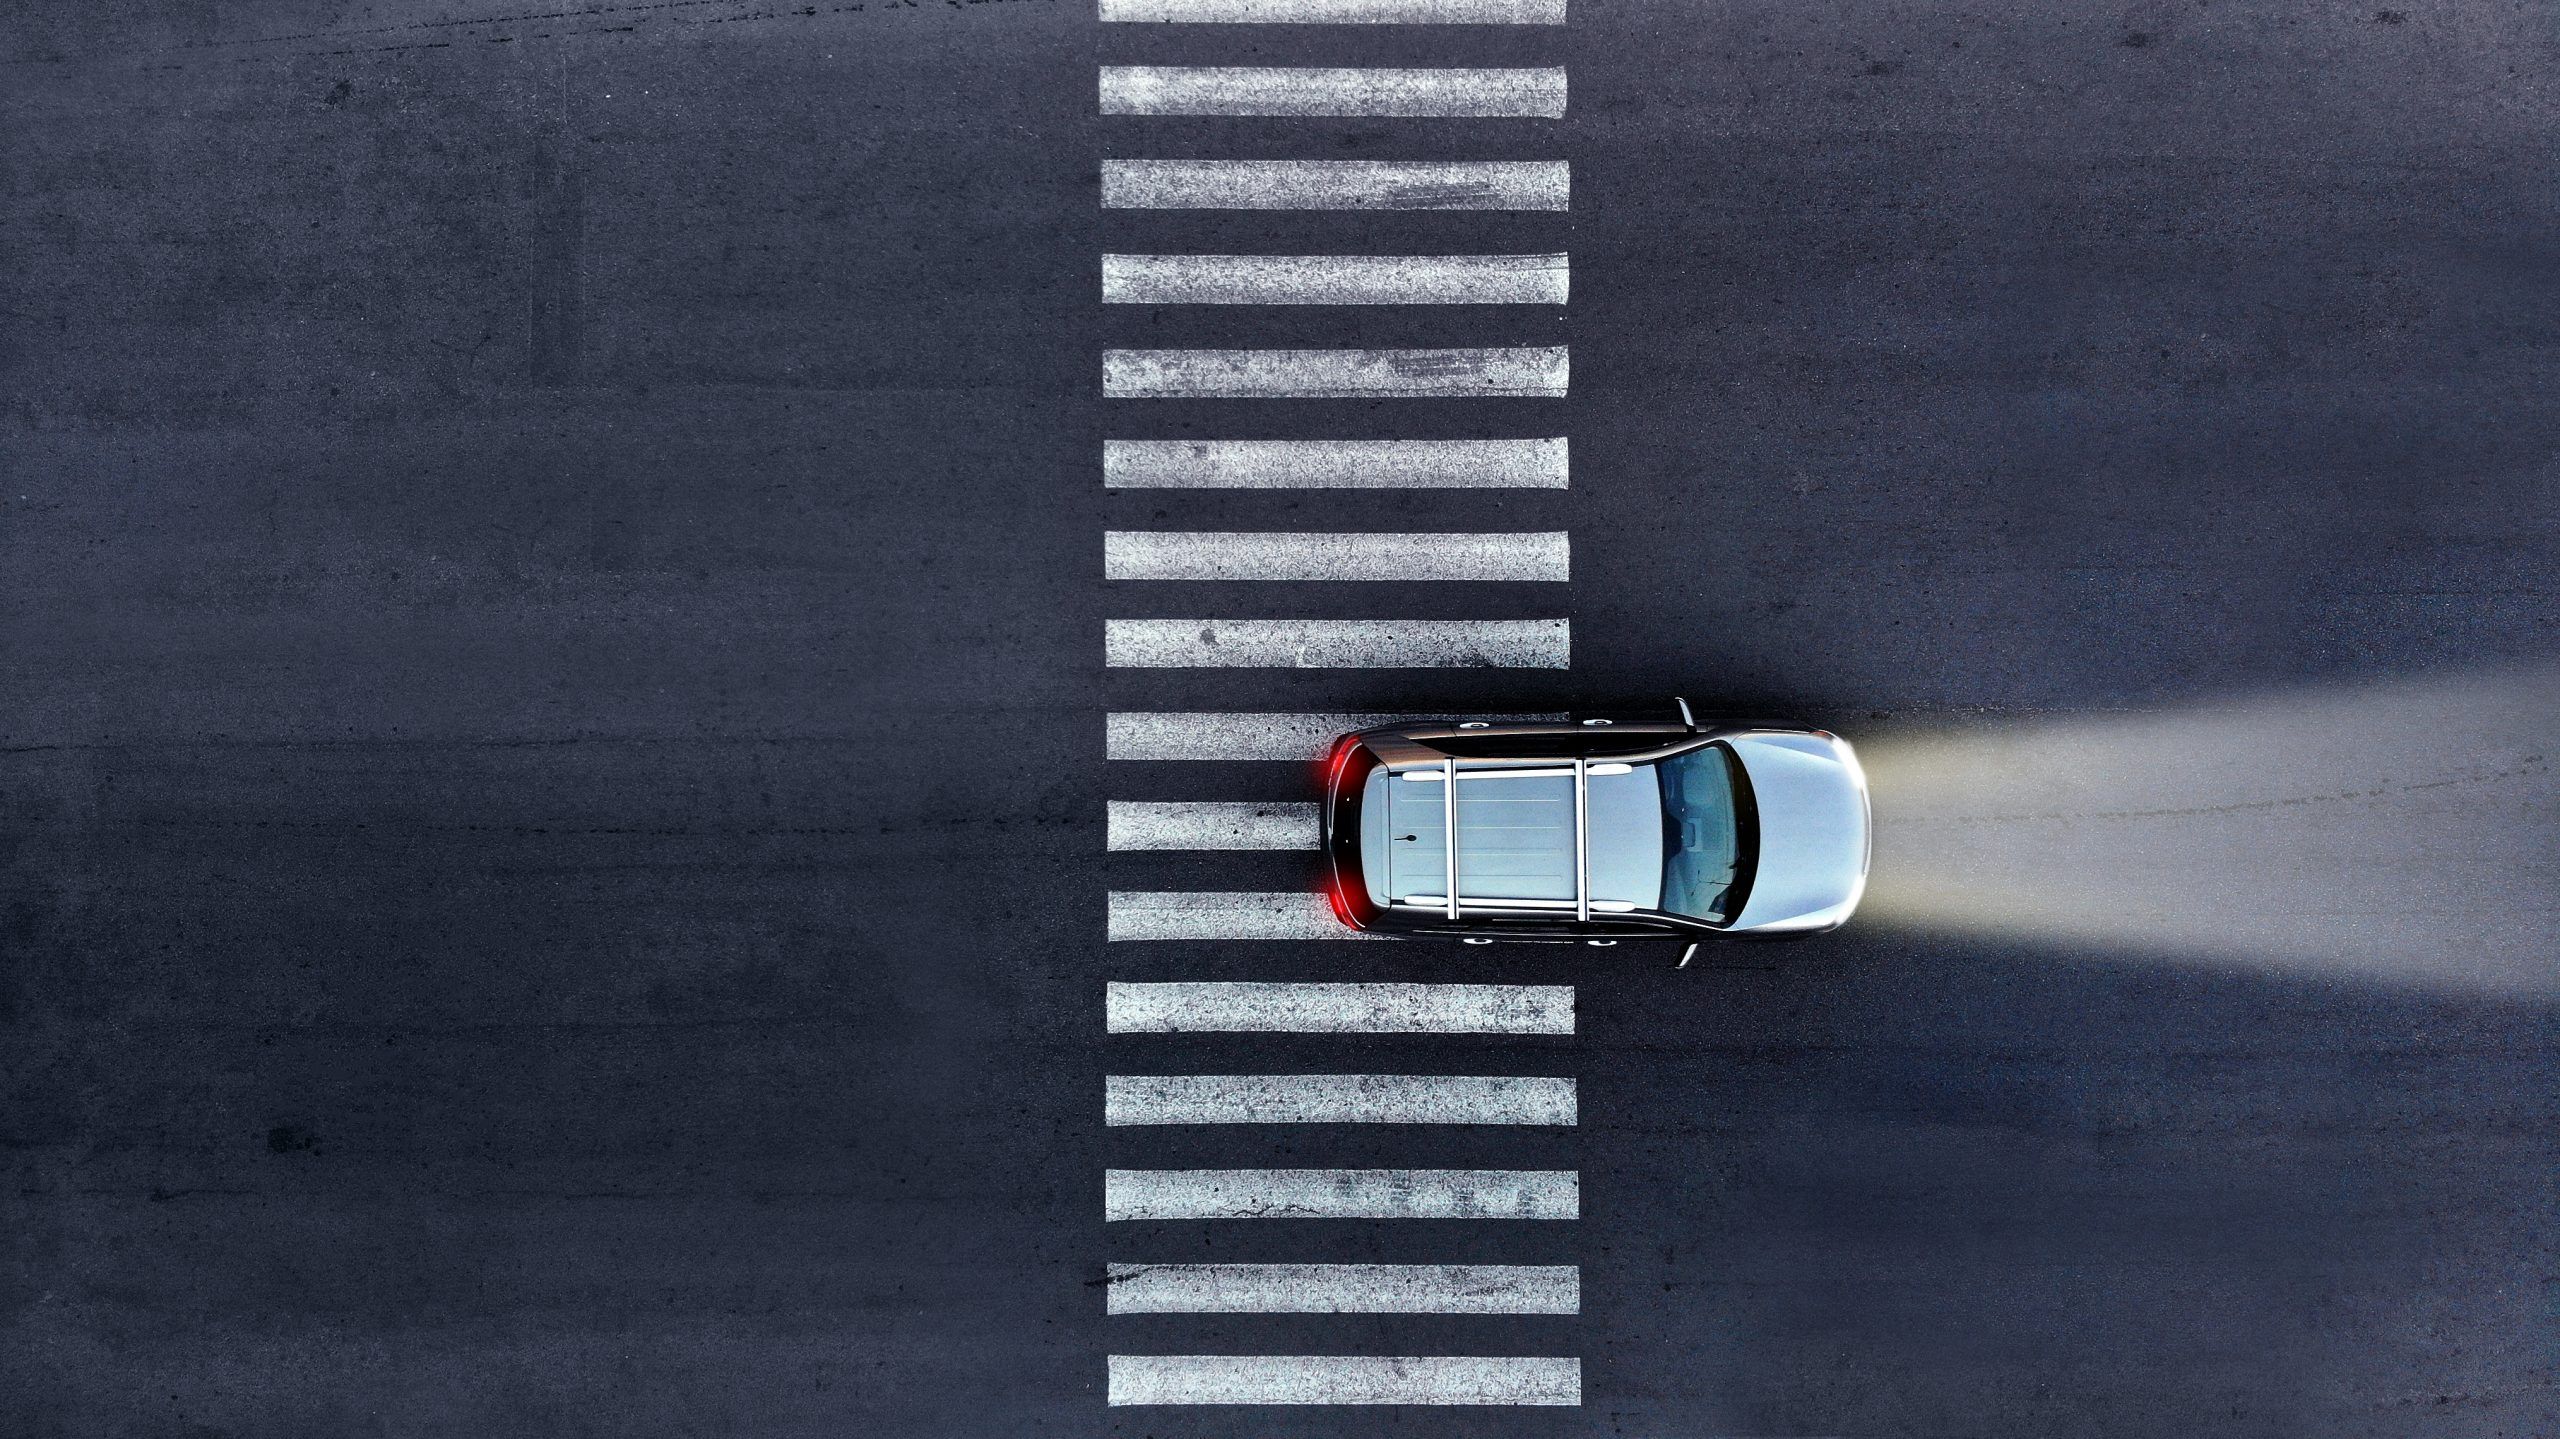 An aerial view of a silver car on a zebra crossing, its high beams are on